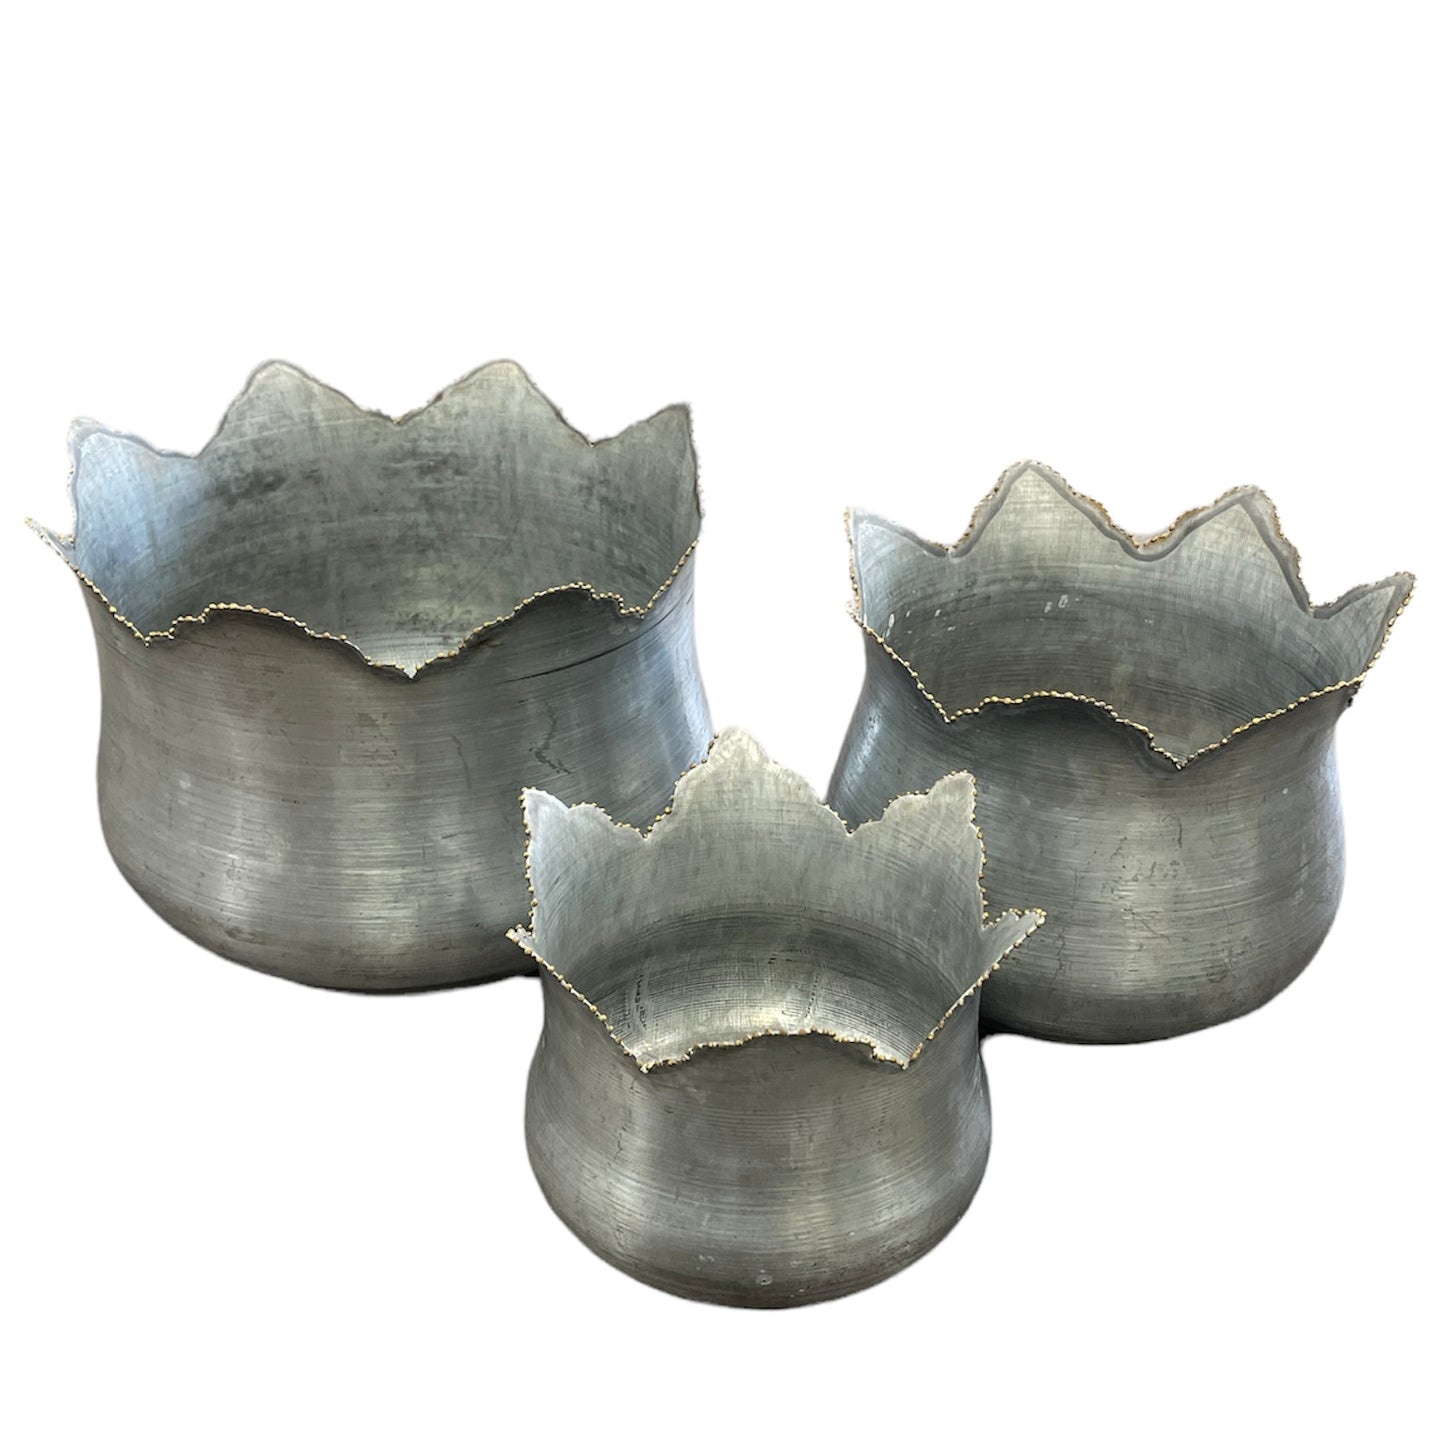 Spiked Metal Planters